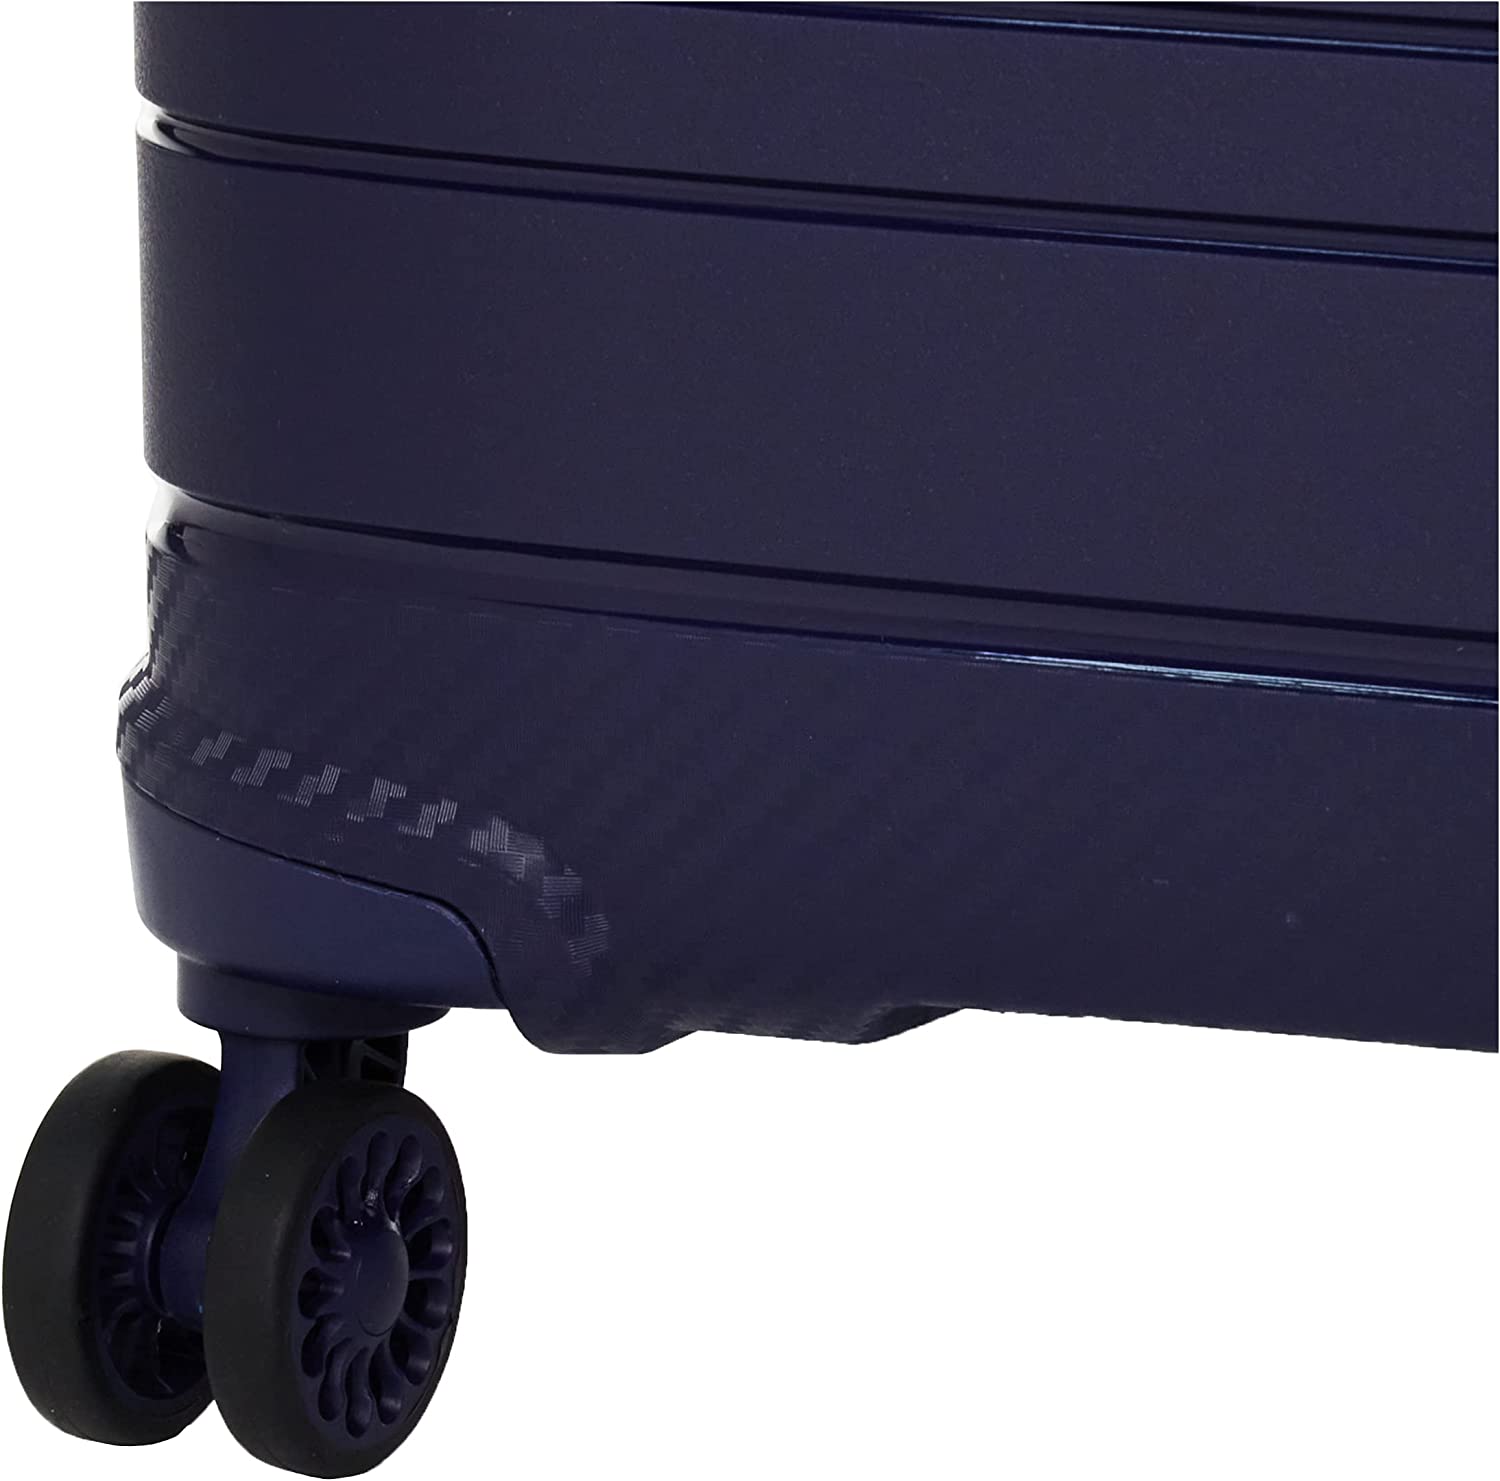 Pierre Cardin Lyon Collection Carry On - Navy